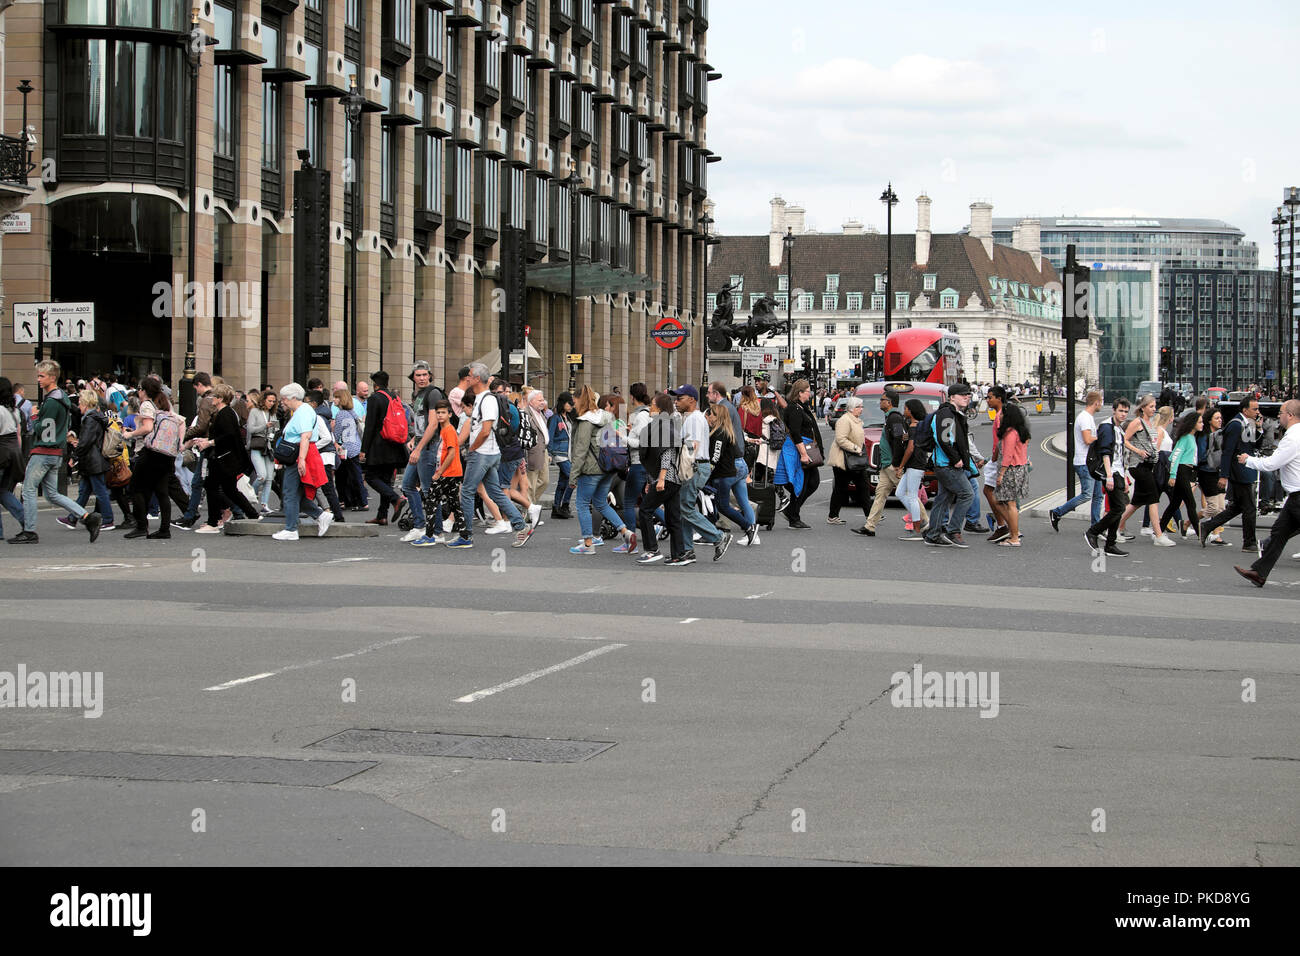 Pedestrians and tourists cross the road at Bridge Street traffic lights pedestrian crossing outside the Houses of Parliament Westminster London UK Stock Photo